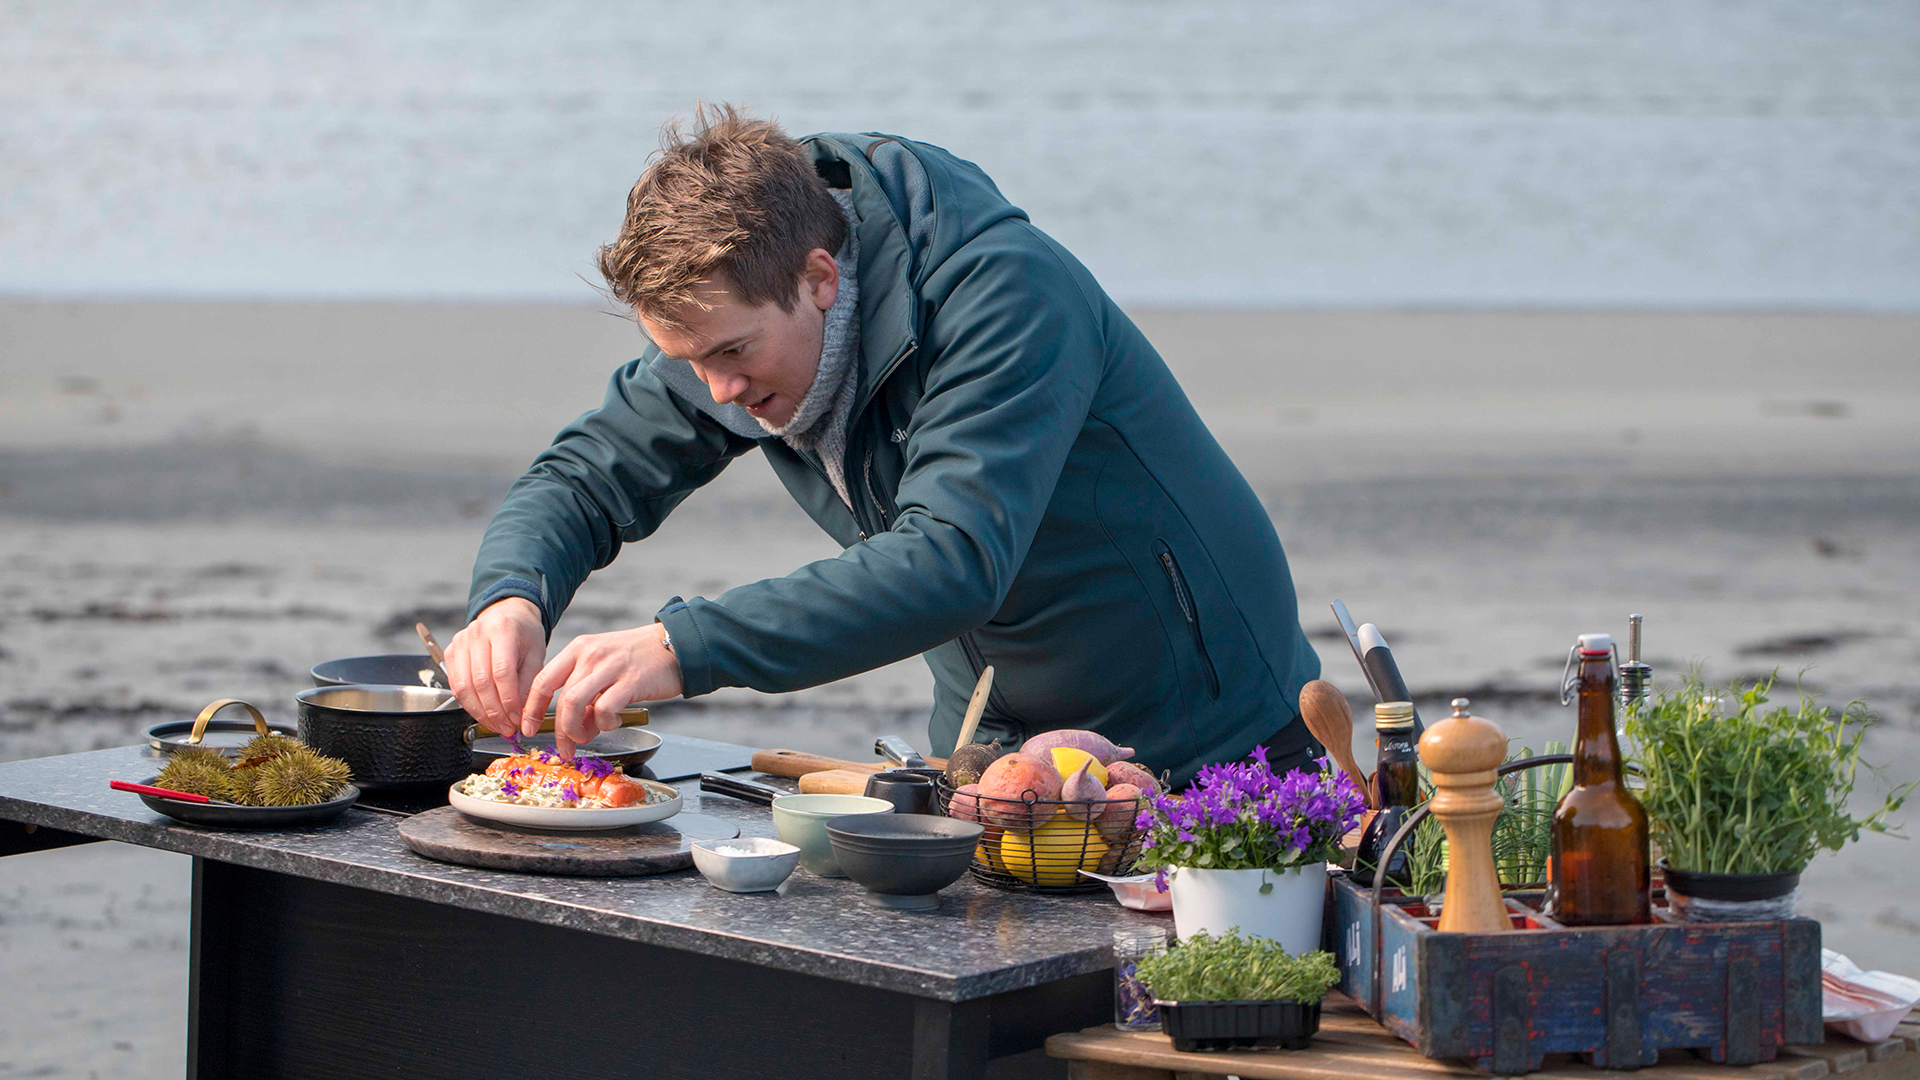 Check out New Scandinavian Cooking Season10 airing on a public television station near you!